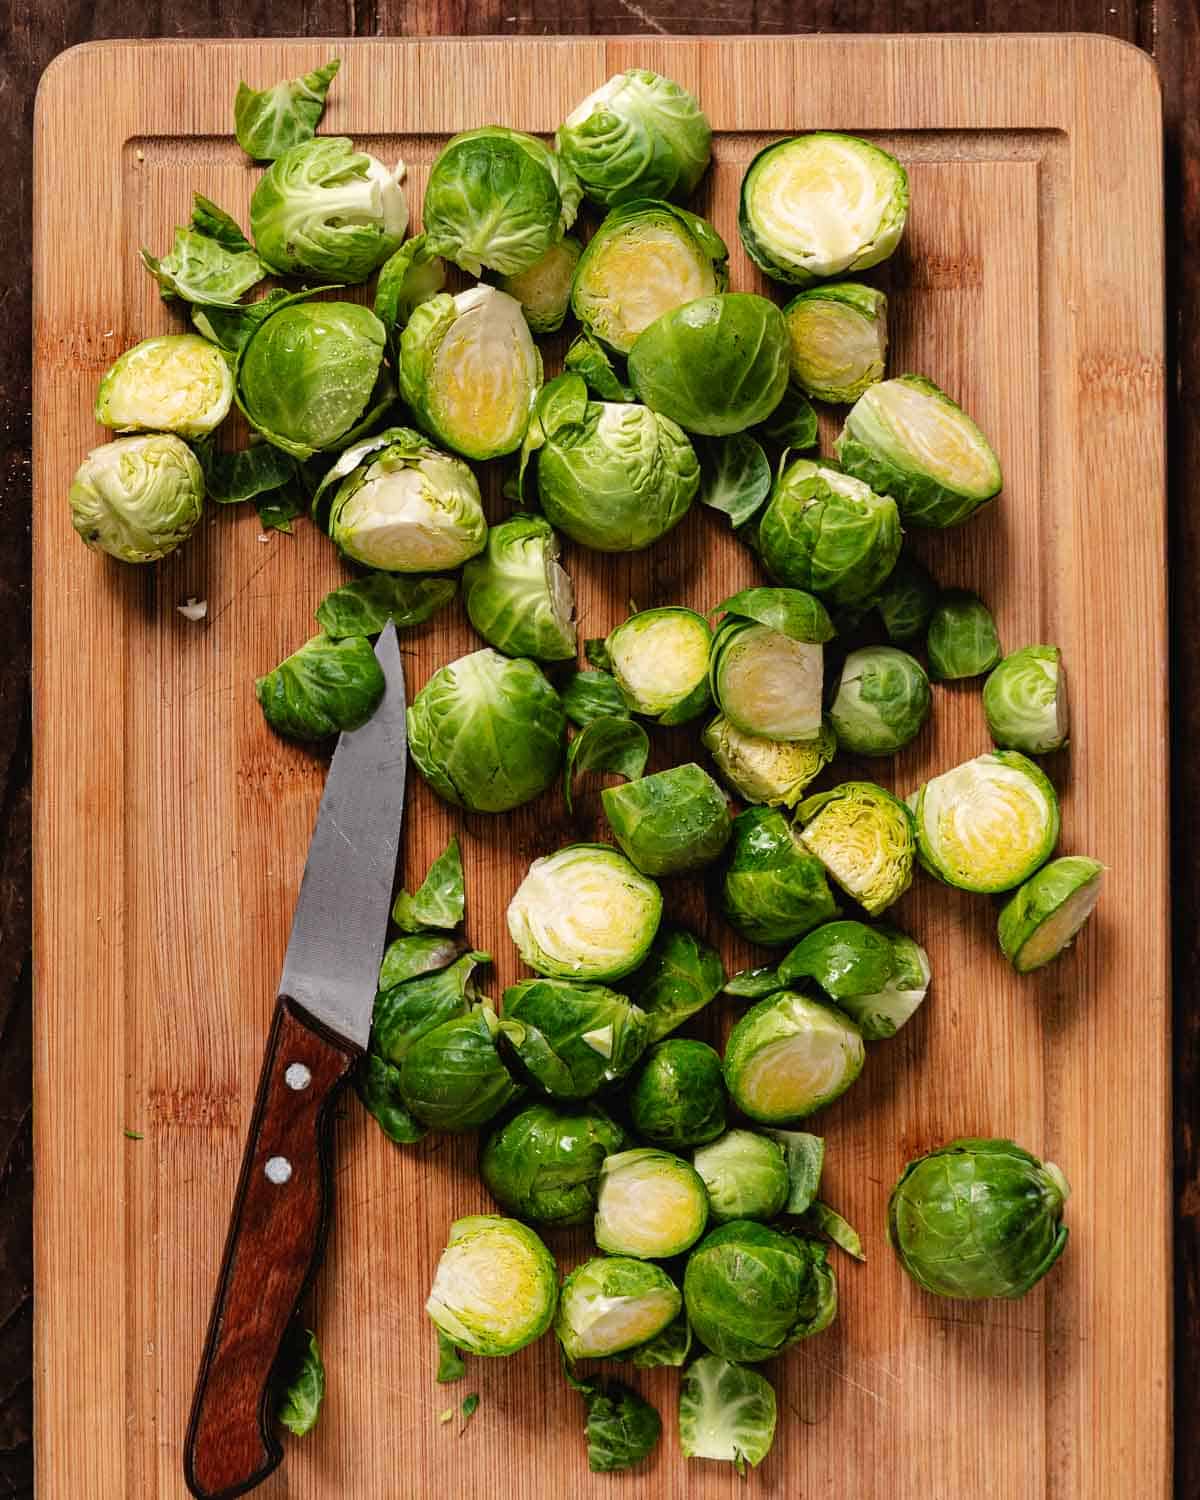 How to cut brussels sprouts with a knife.